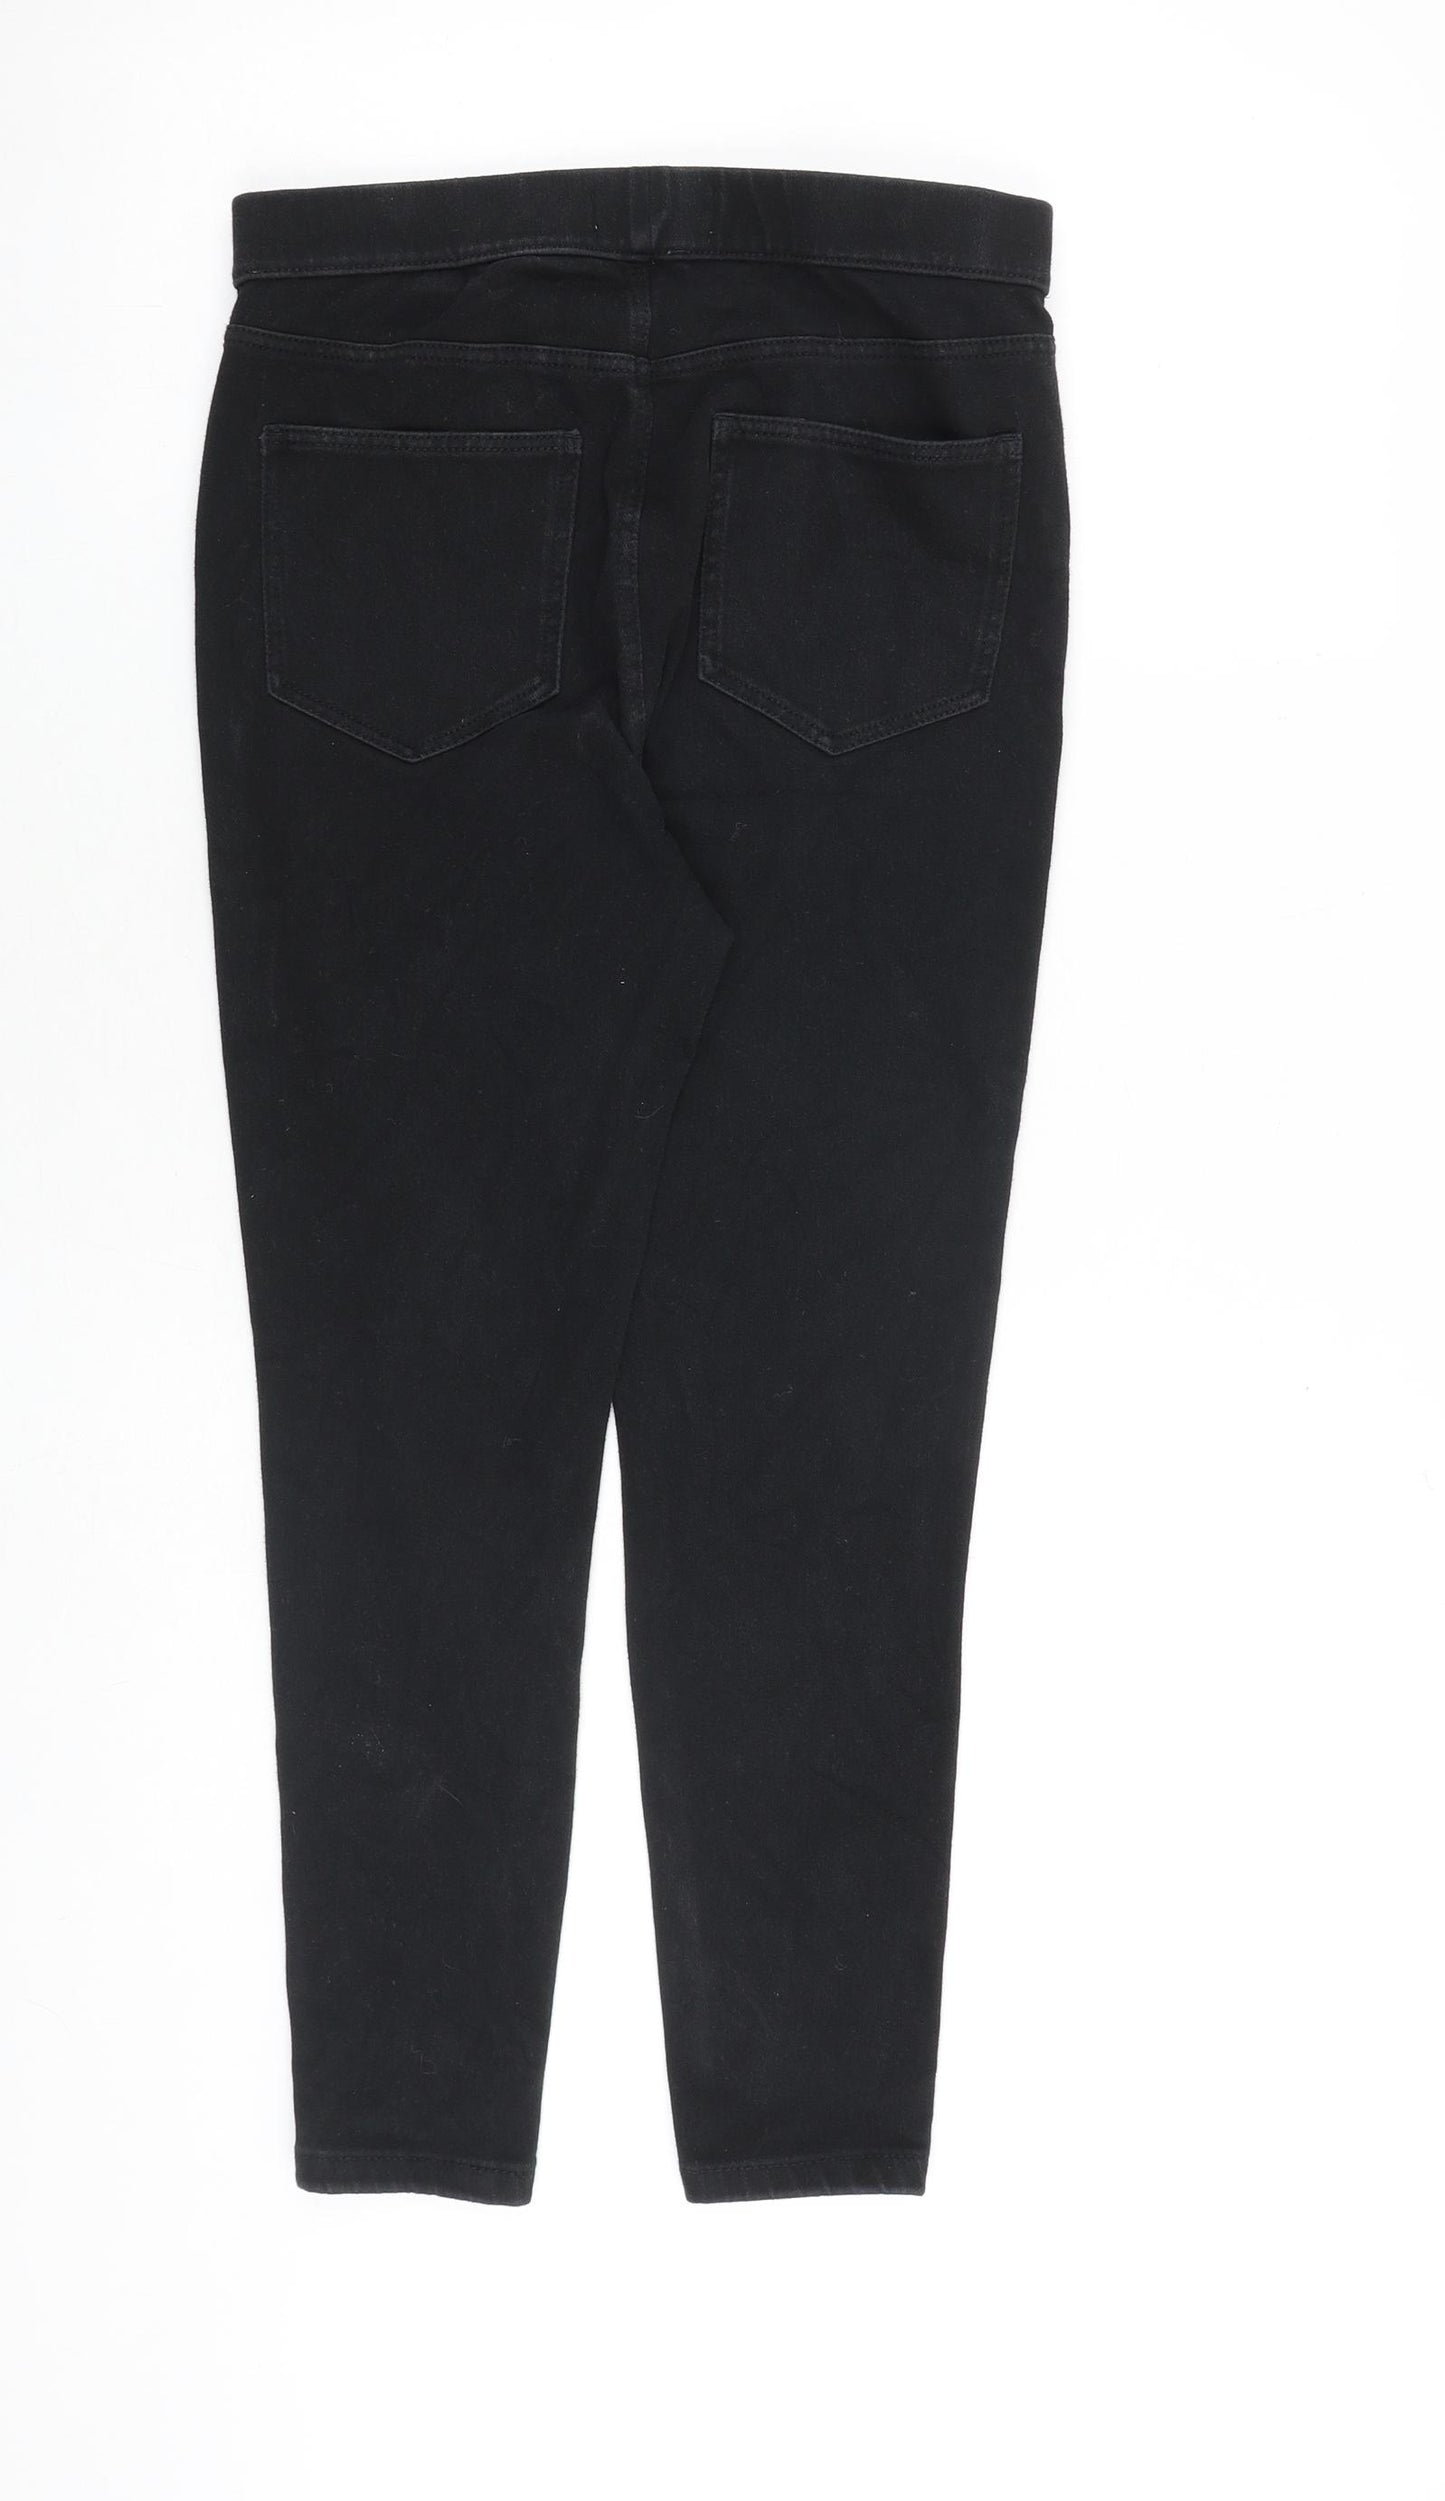 Marks and Spencer Womens Black Cotton Jegging Jeans Size 12 L26 in Regular